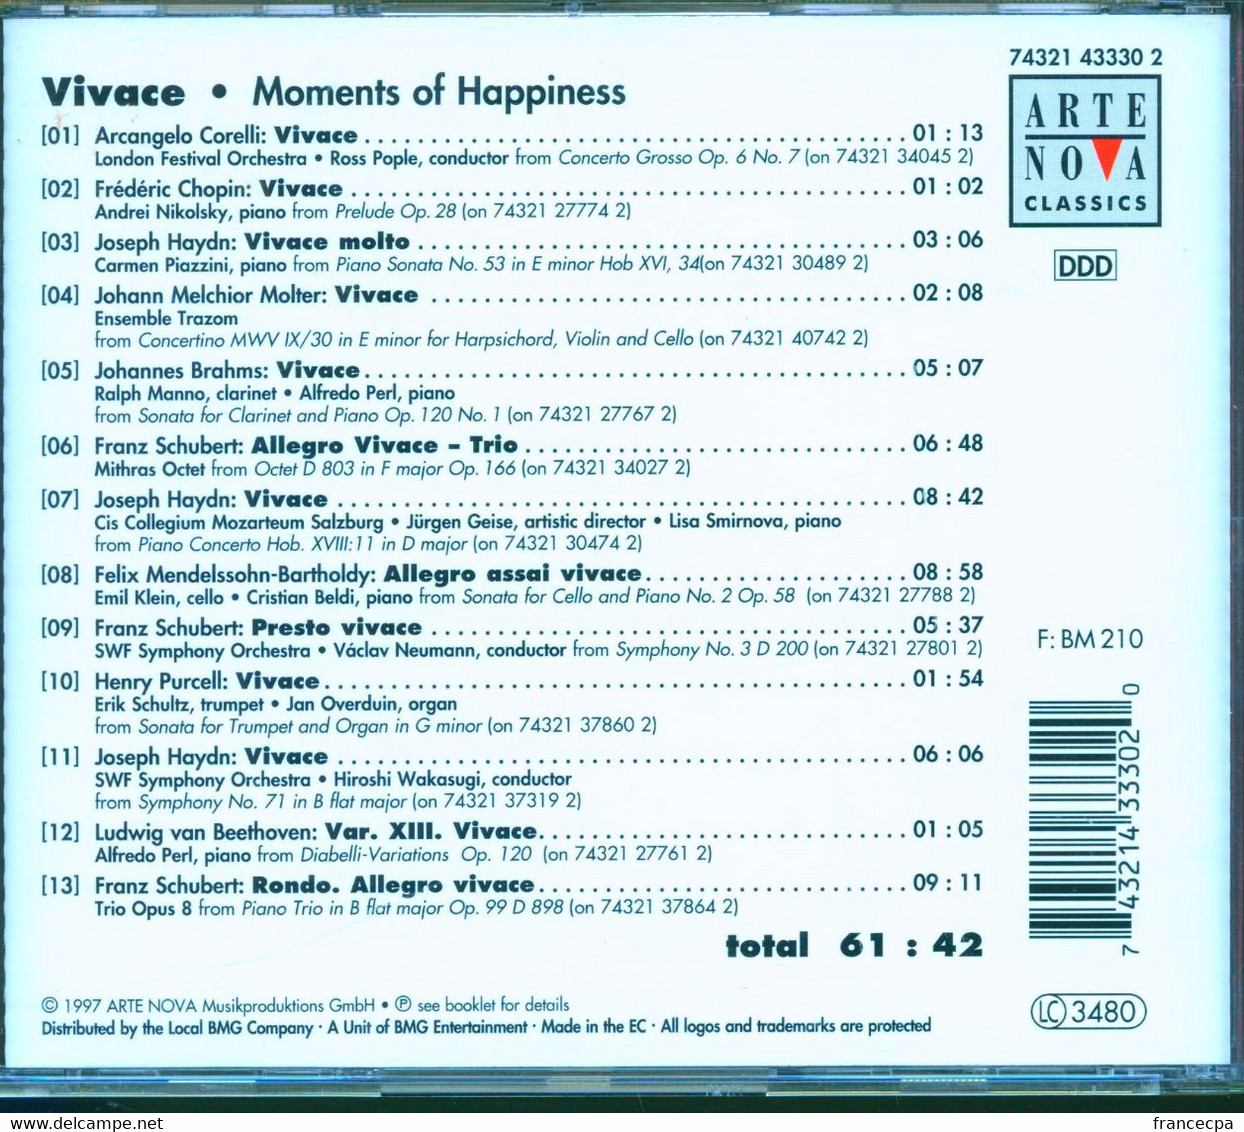 008 - CD VIVACE - Moments Of Happiness - Verzameluitgaven